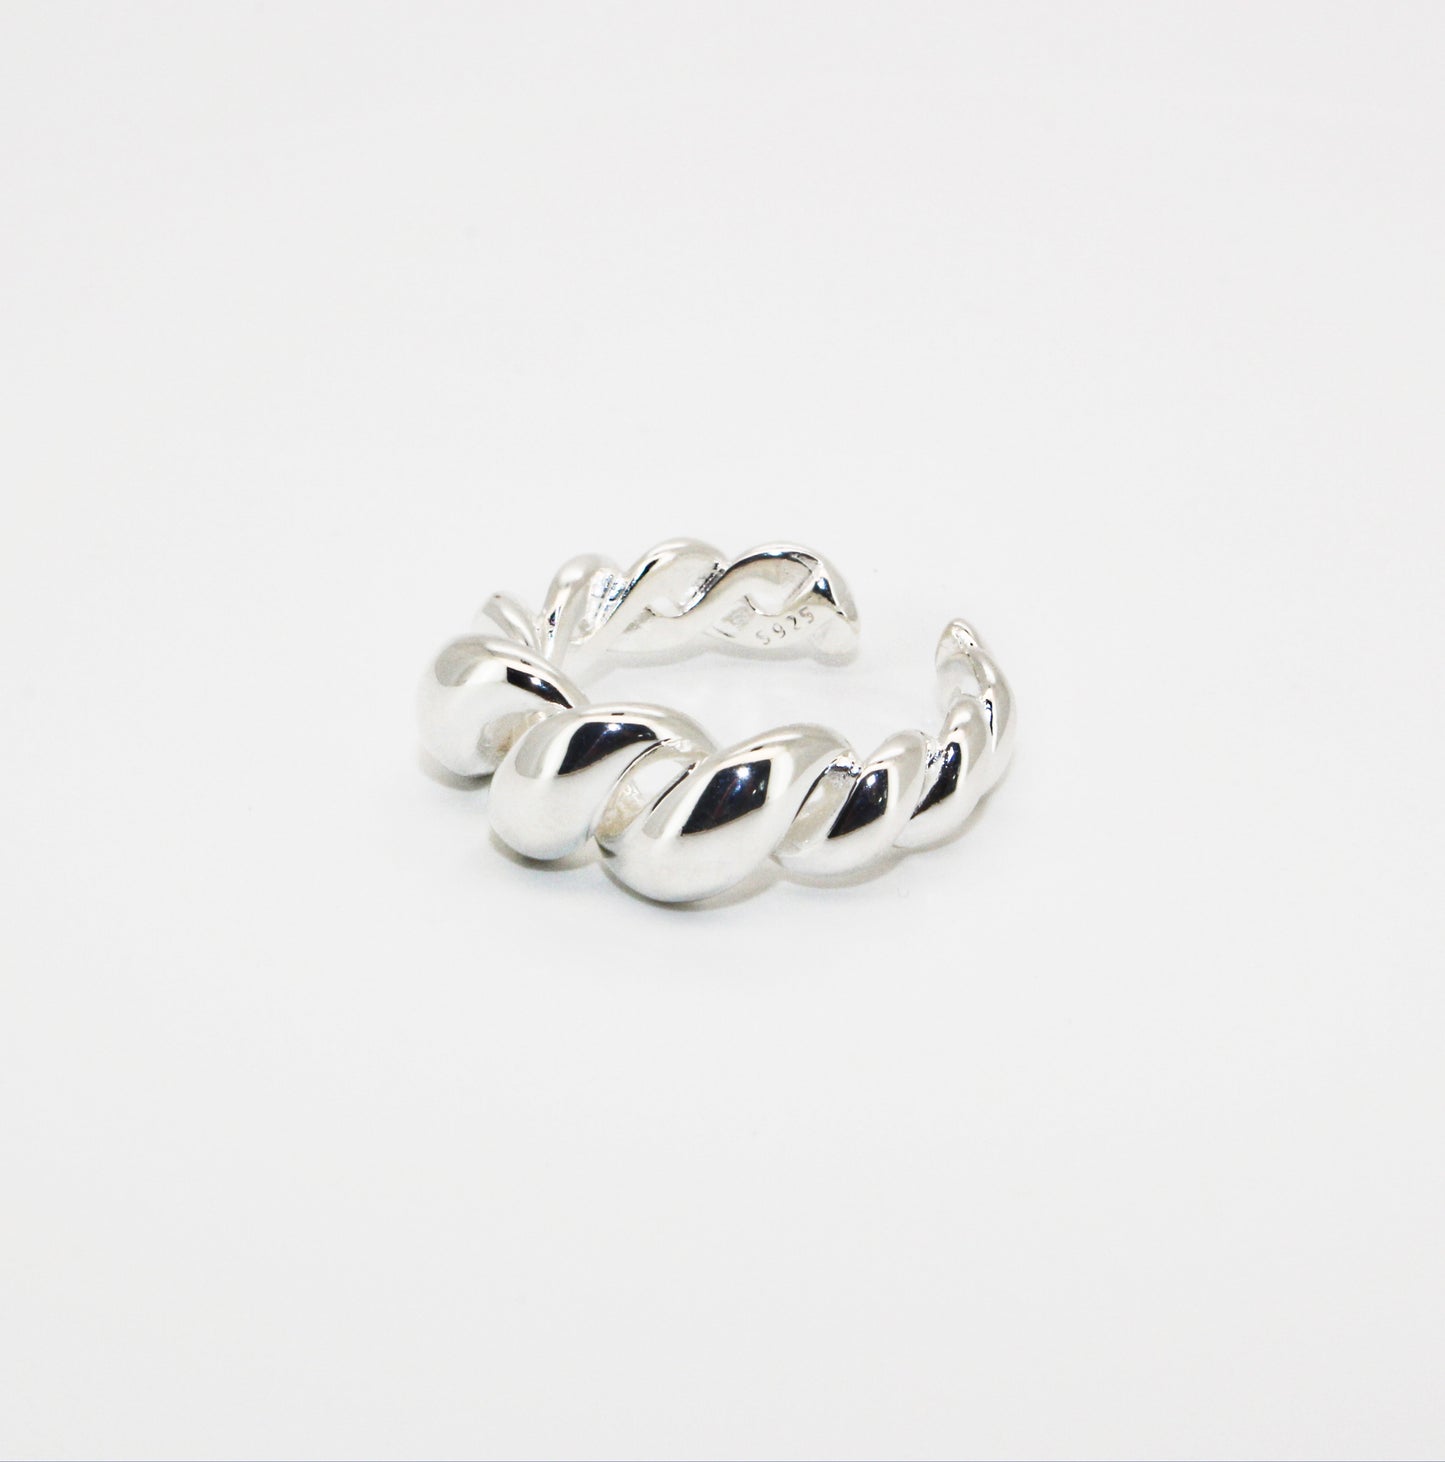 CROISSANT ∙ 925 Sterling Silver Ribbon Ring ∙ Candy Ring ∙ Twisted Gold Ring ∙ Unique Solid Silver Signet ∙ Adjustable Ring Creation Megane